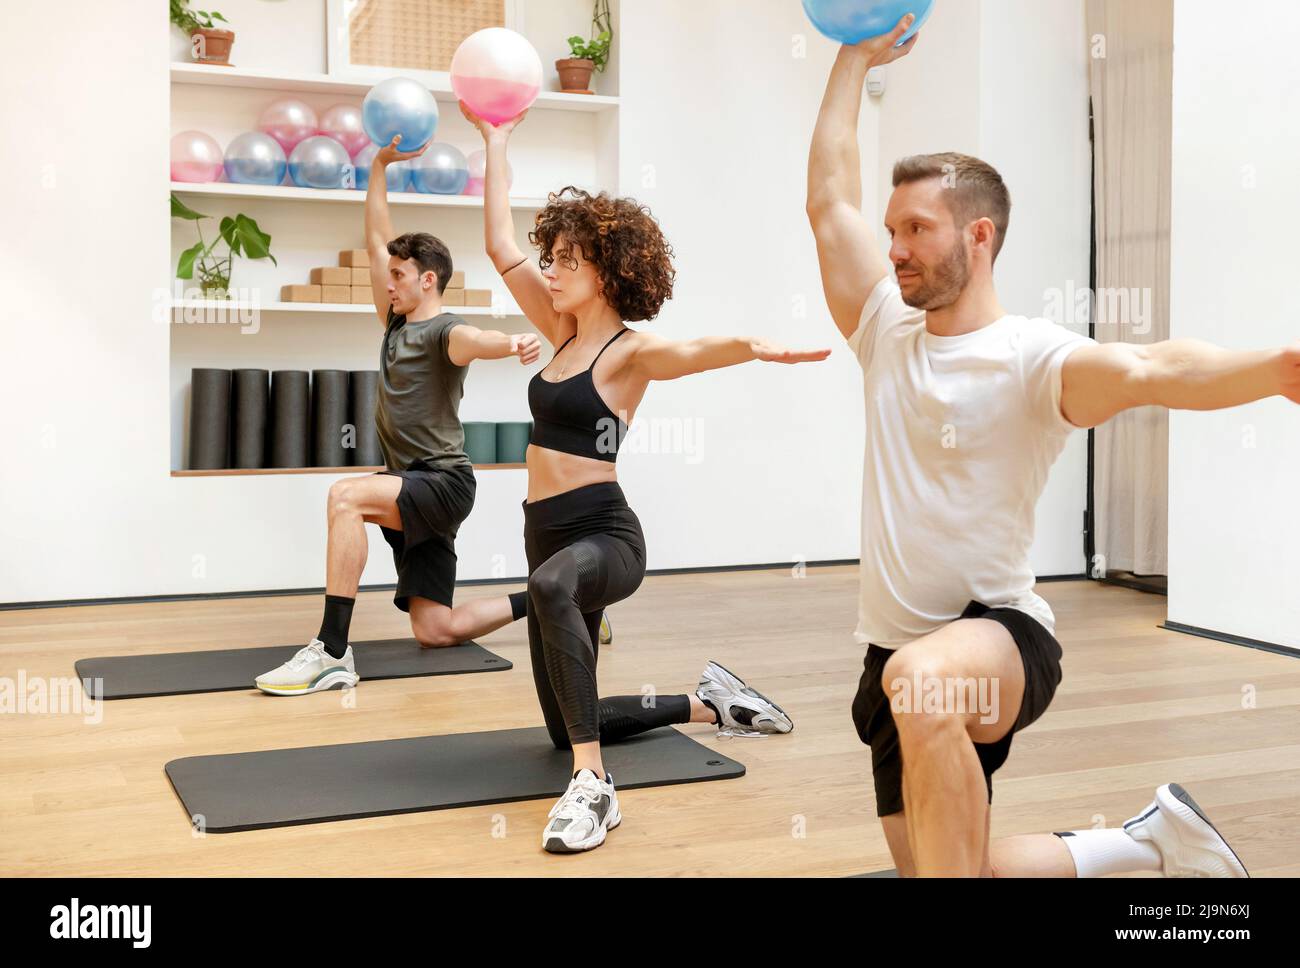 Group of focused sportive people in activewear doing shoulder press exercise with medicine ball filled with fluid during fitness class Stock Photo